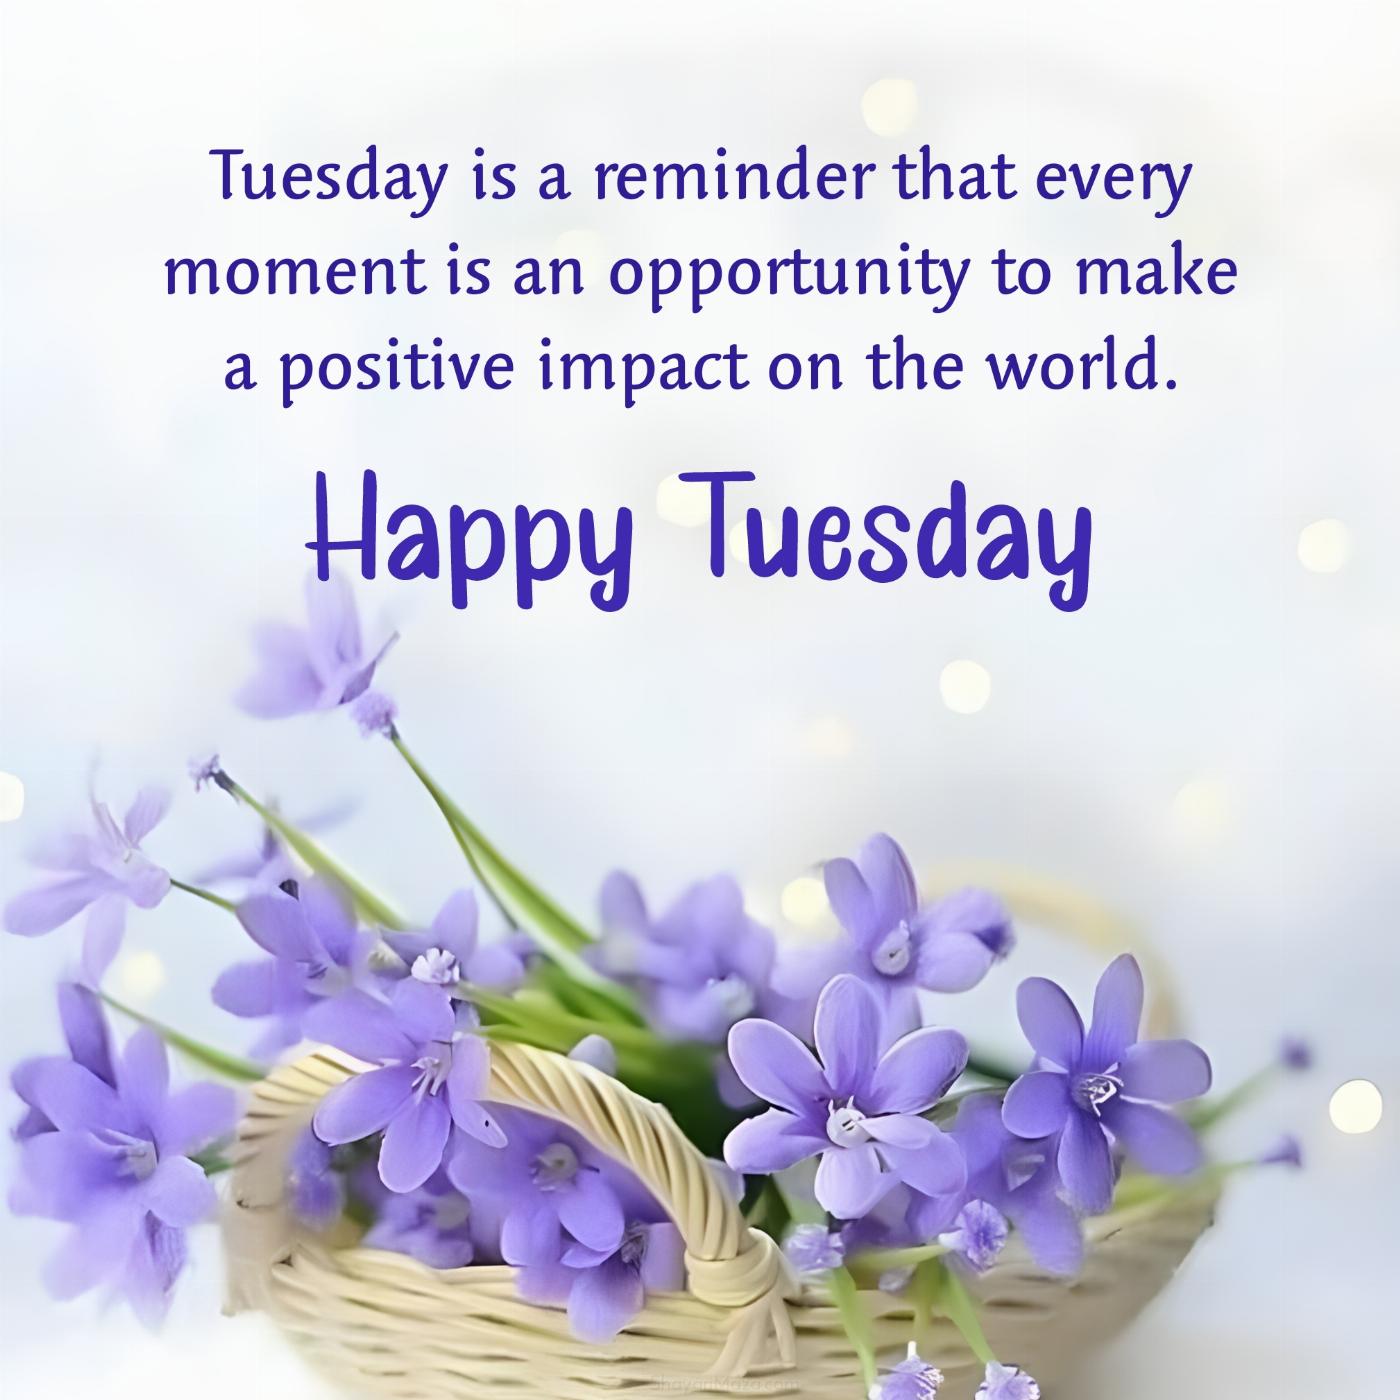 Tuesday is a reminder that every moment is an opportunity